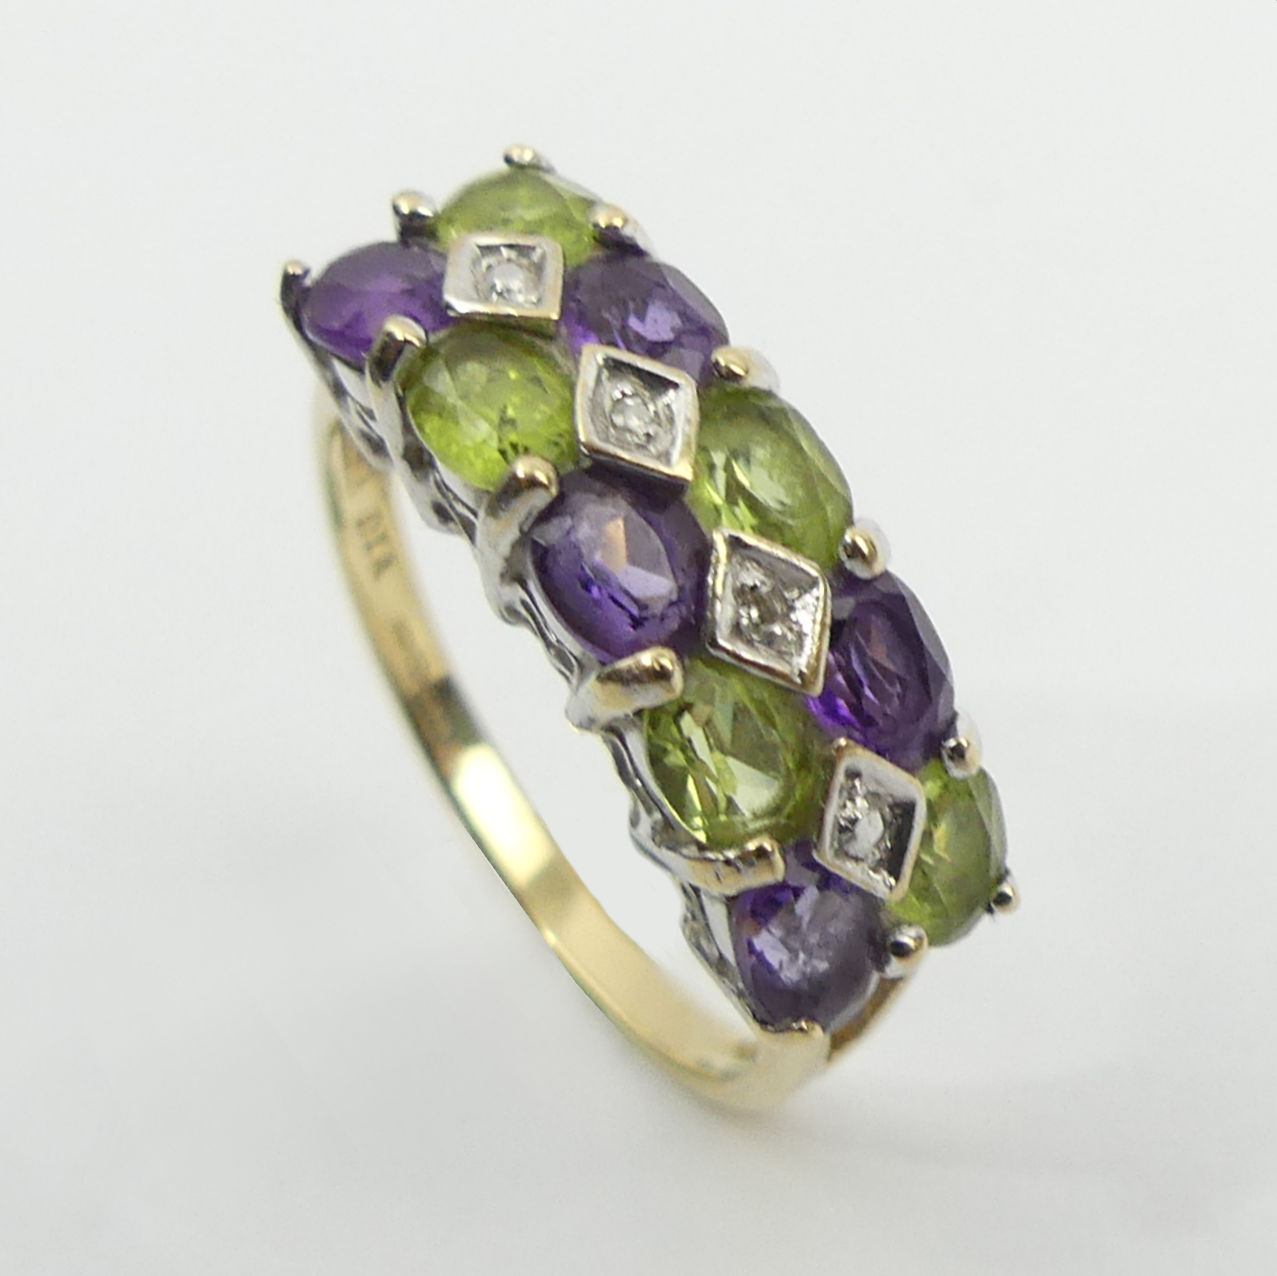 9ct gold peridot, amethyst and diamond ring, 2.4 grams, 6.6mm, size M 1/2. UK Postage £12.